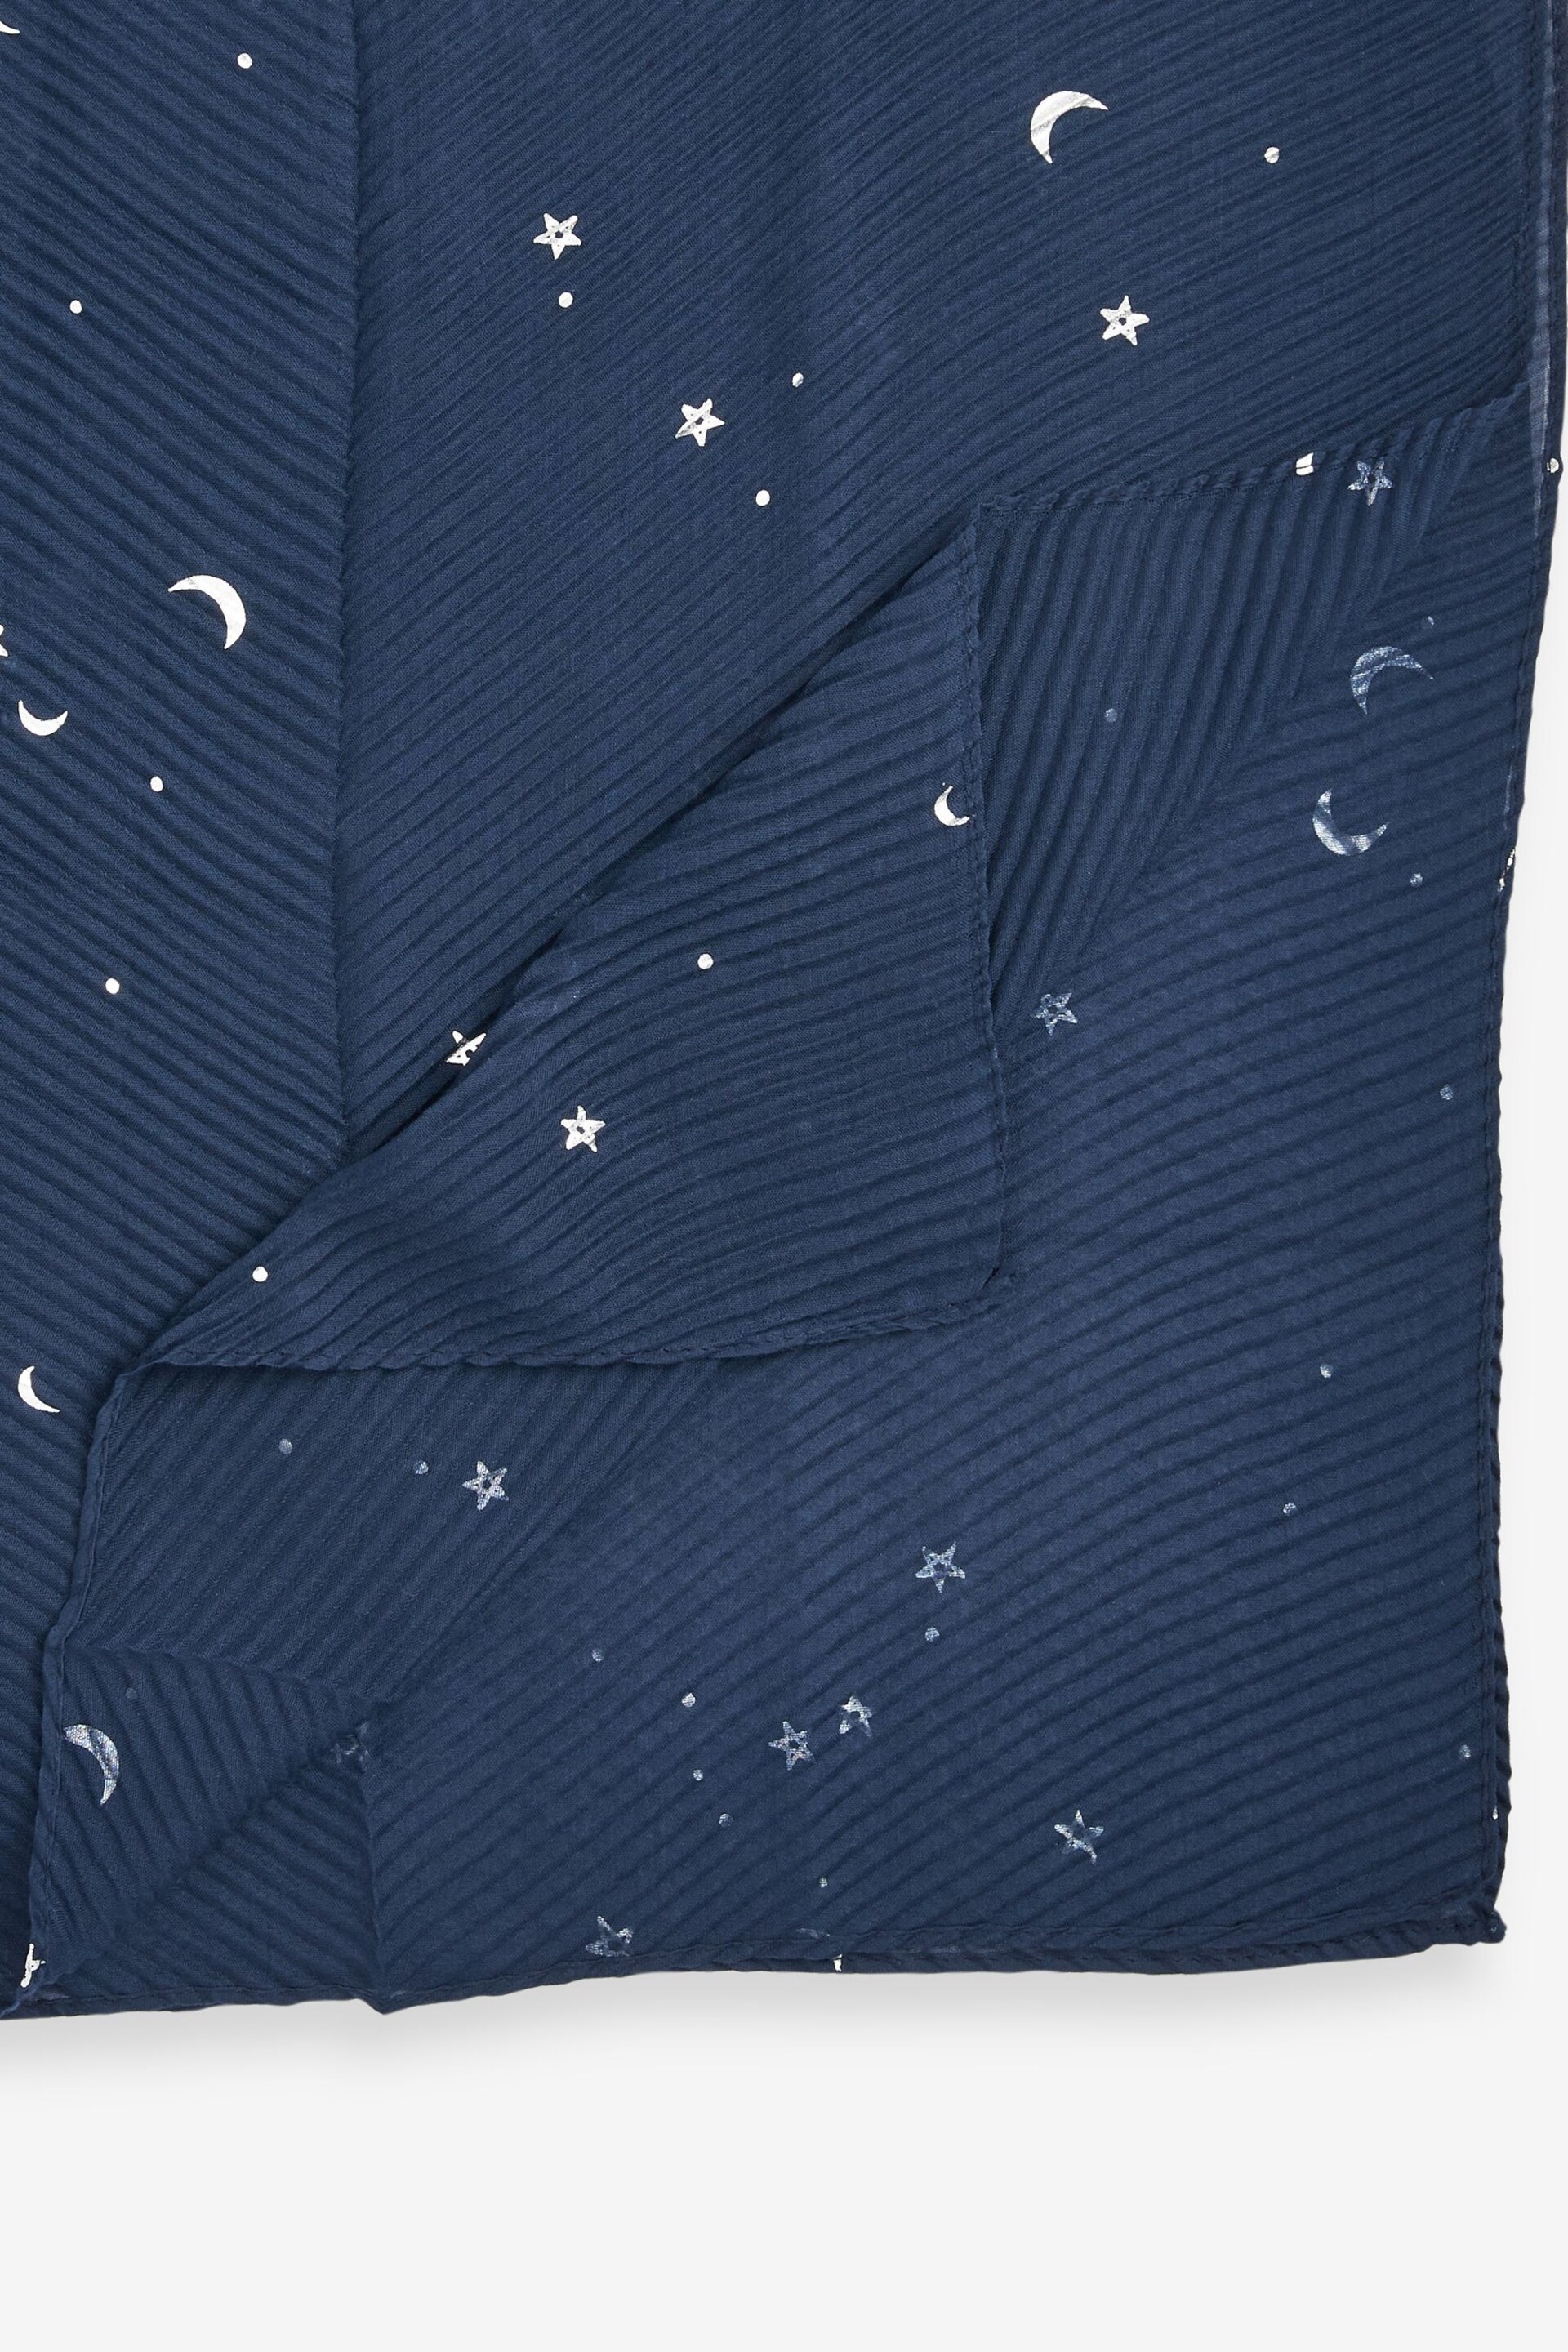 Navy Foil Moon and Star Plisse Midweight Scarf - Image 5 of 6